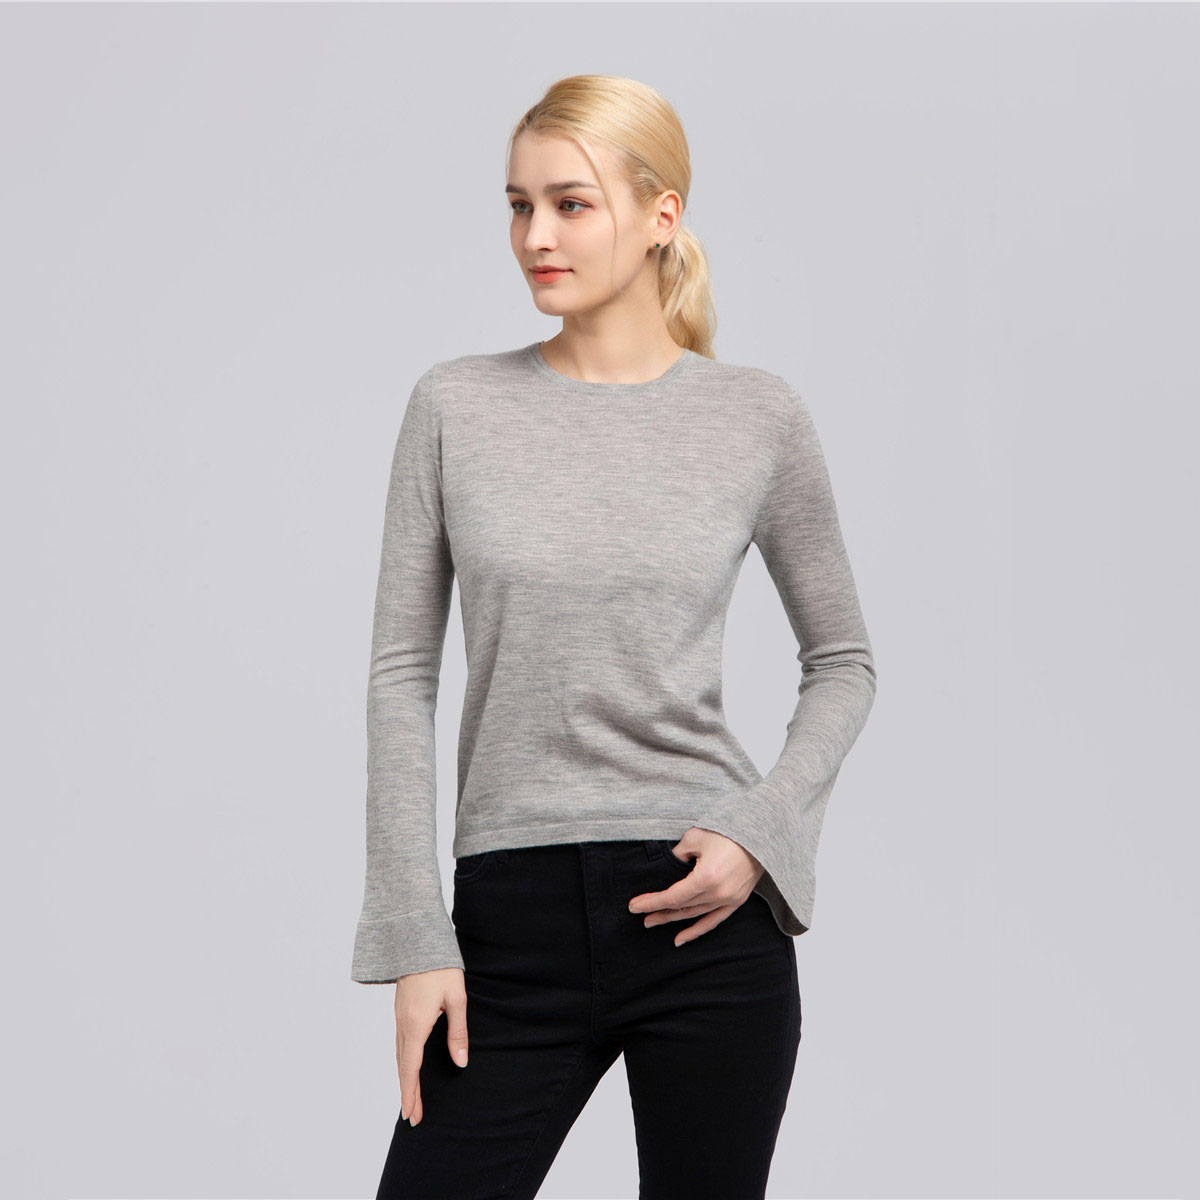 long sleeves cashmere sweater